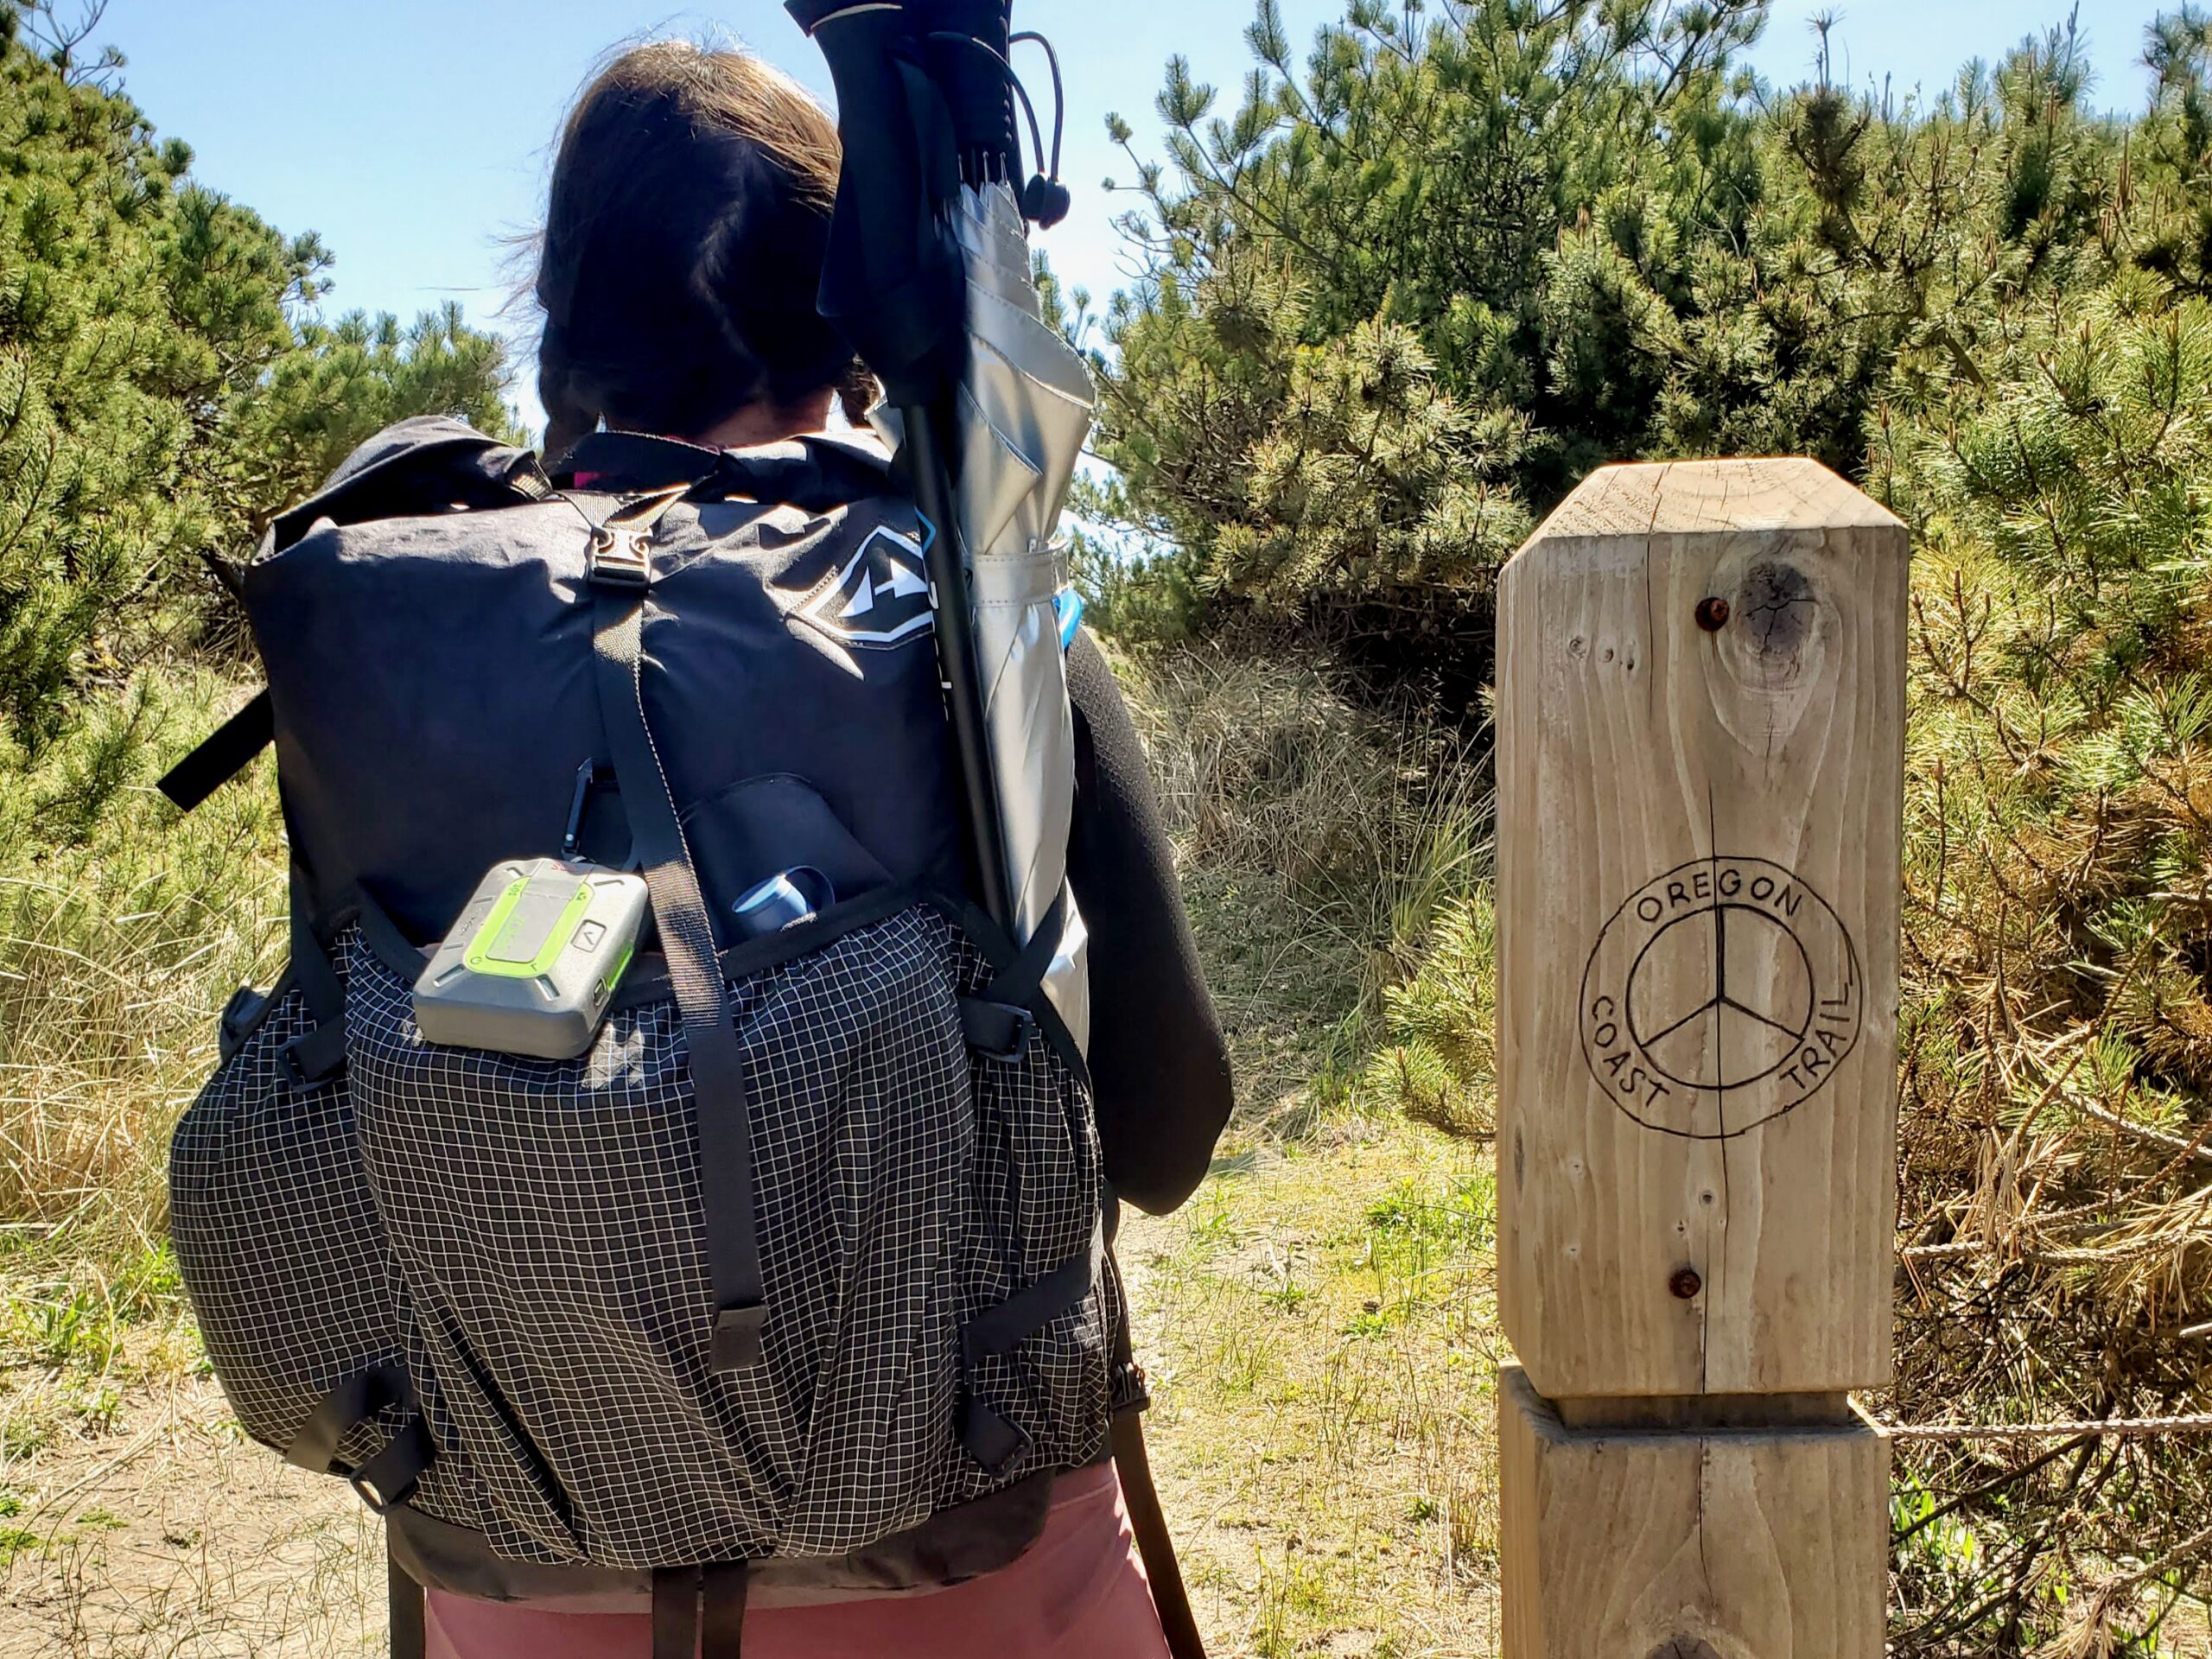 Our tester reported that the Hyperlite 2400 Southwest was up there with the best ultralight backpacks.